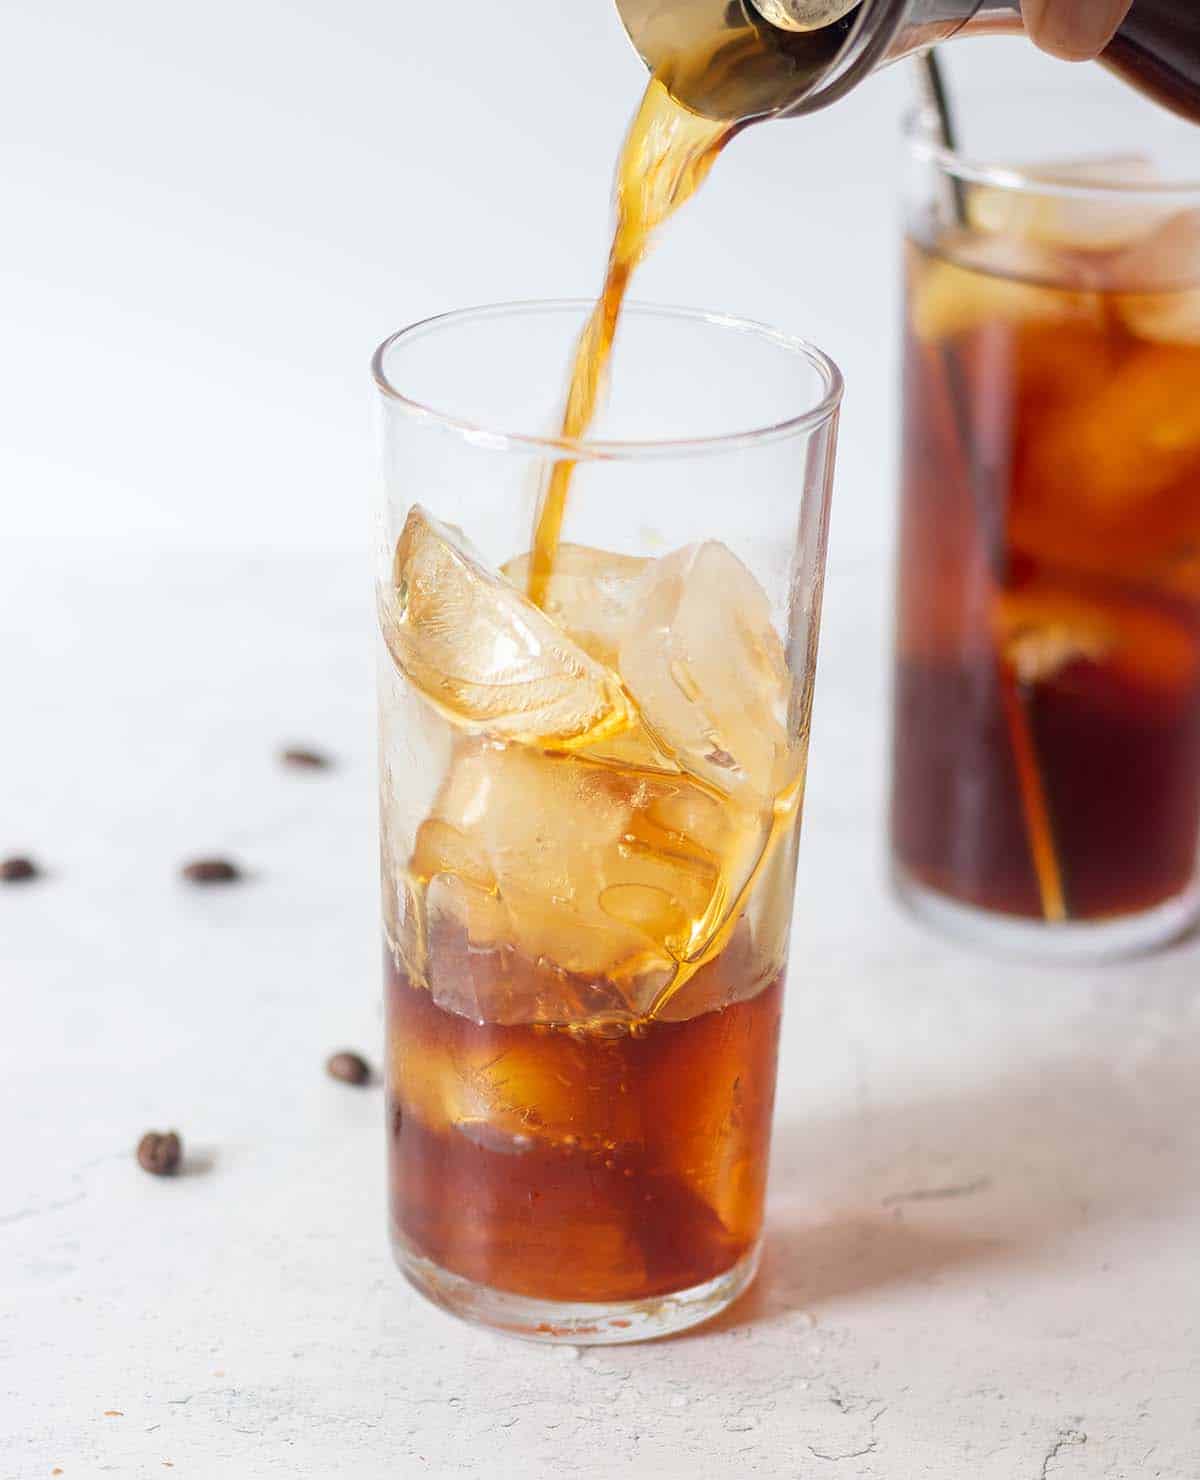 cold brew coffee being poured in a glass with ice.